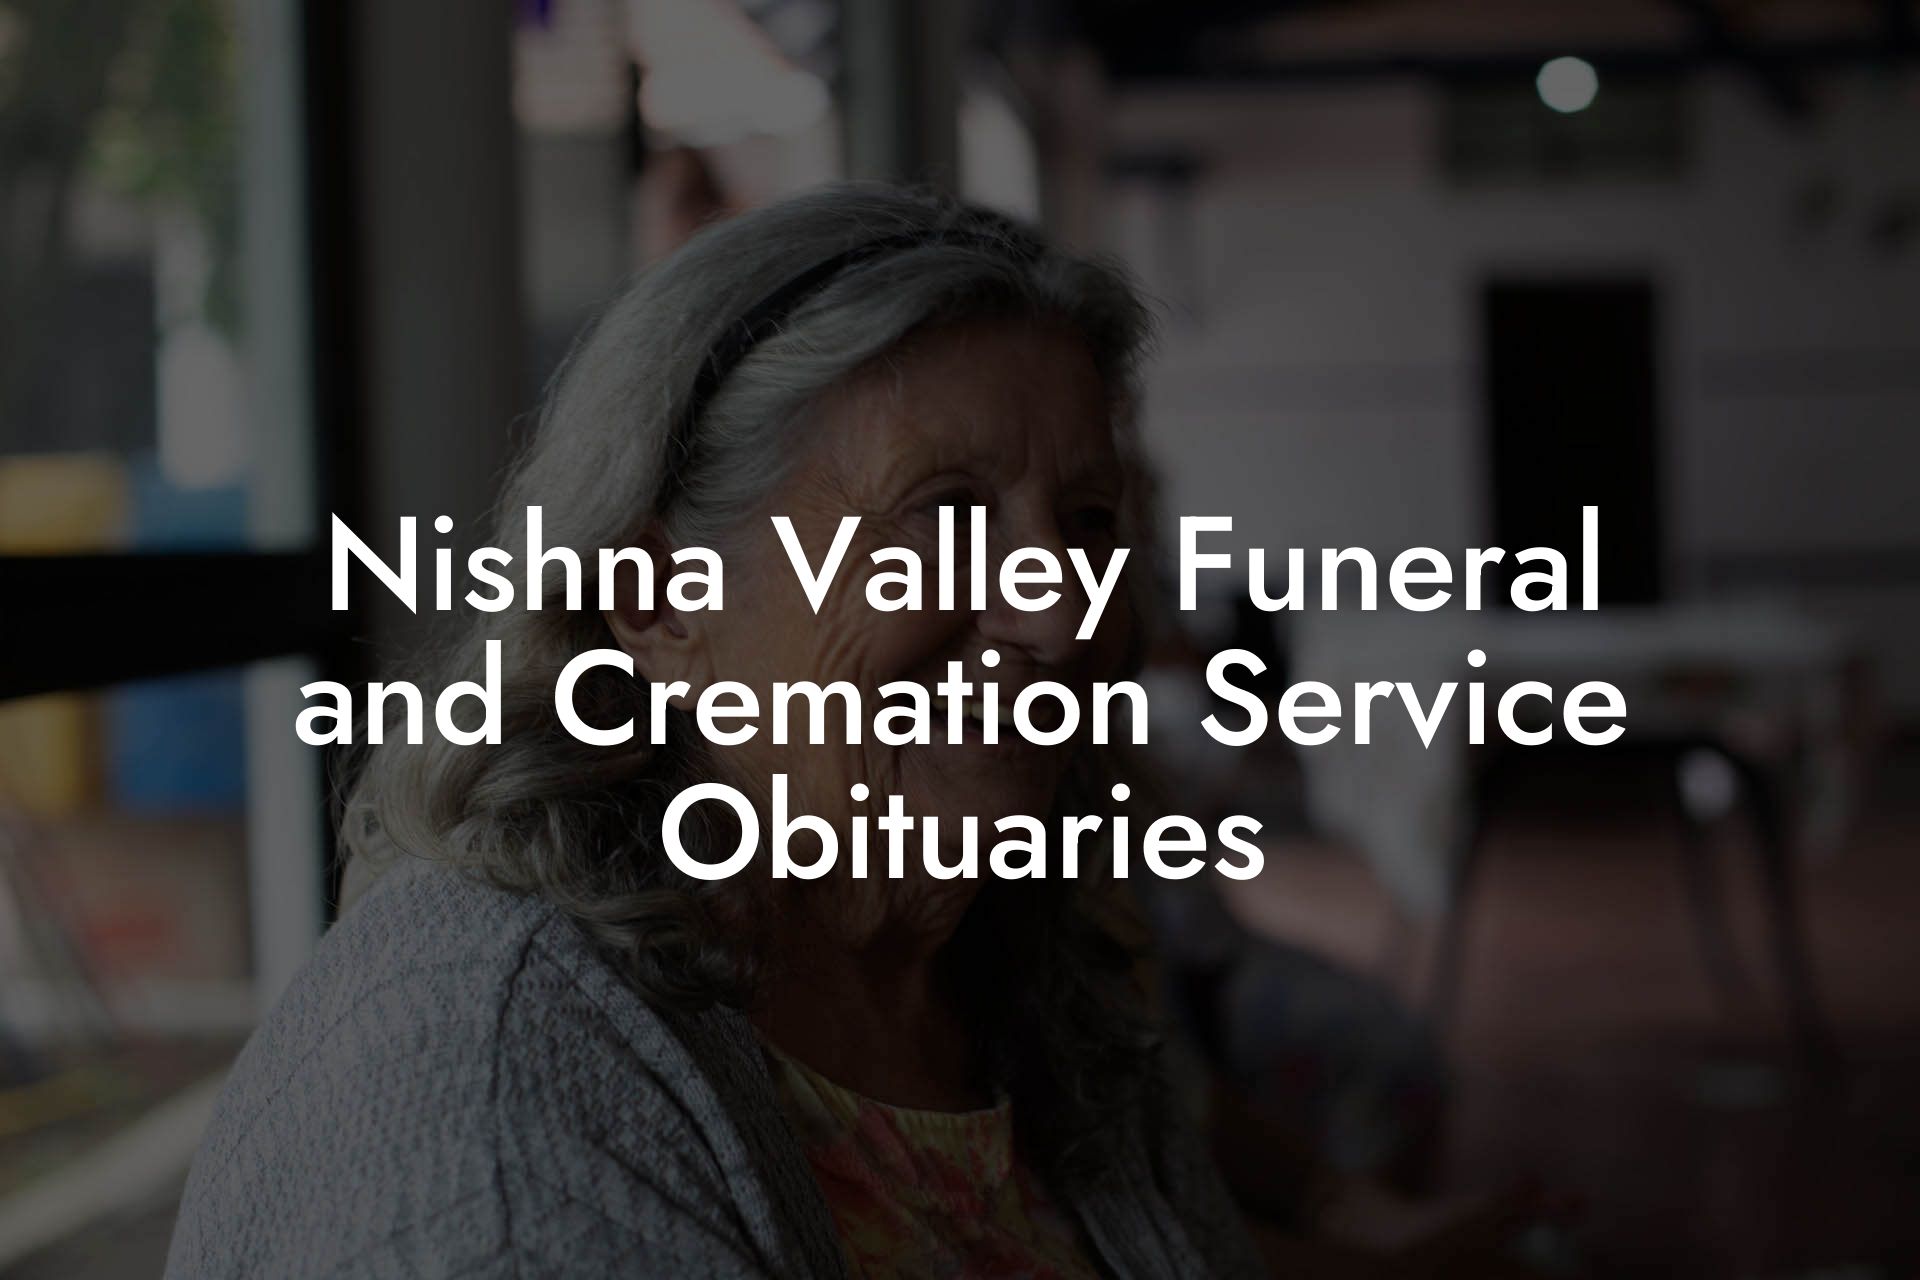 Nishna Valley Funeral and Cremation Service Obituaries